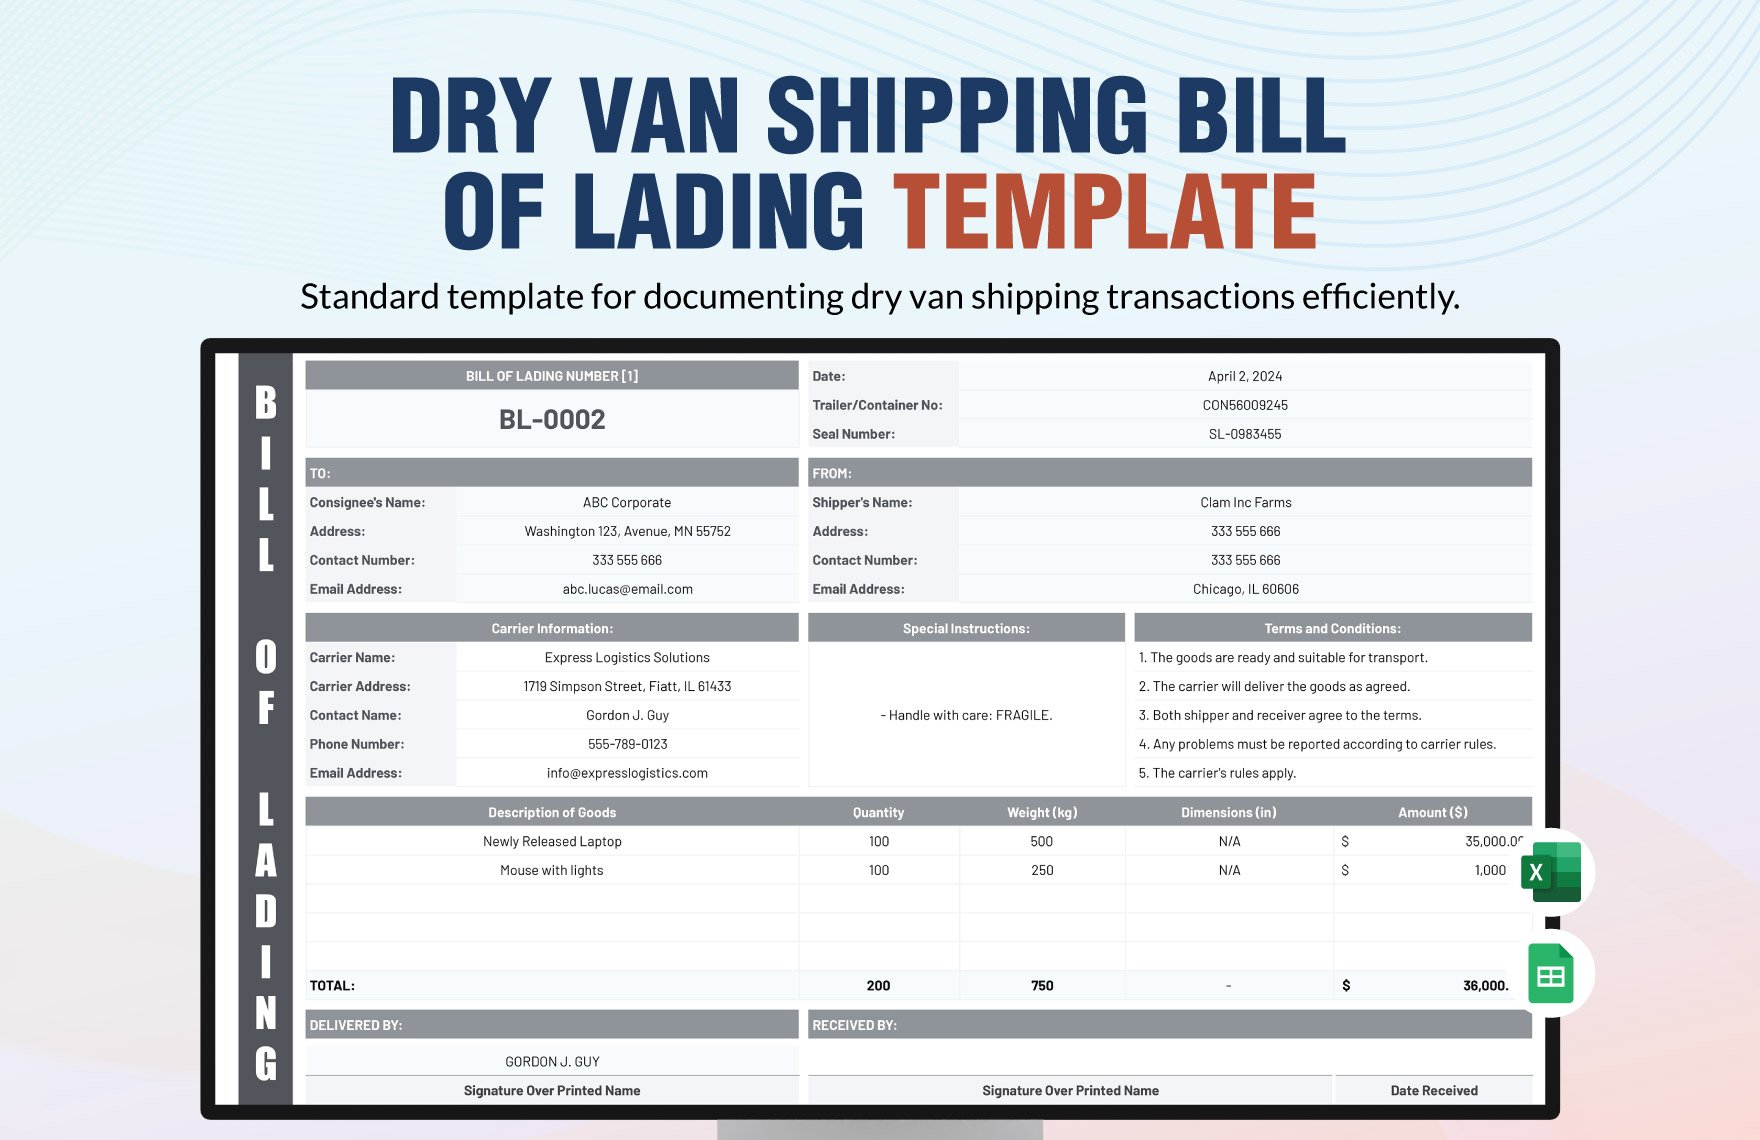 Dry Van Shipping Bill of Lading Template in Excel, Google Sheets